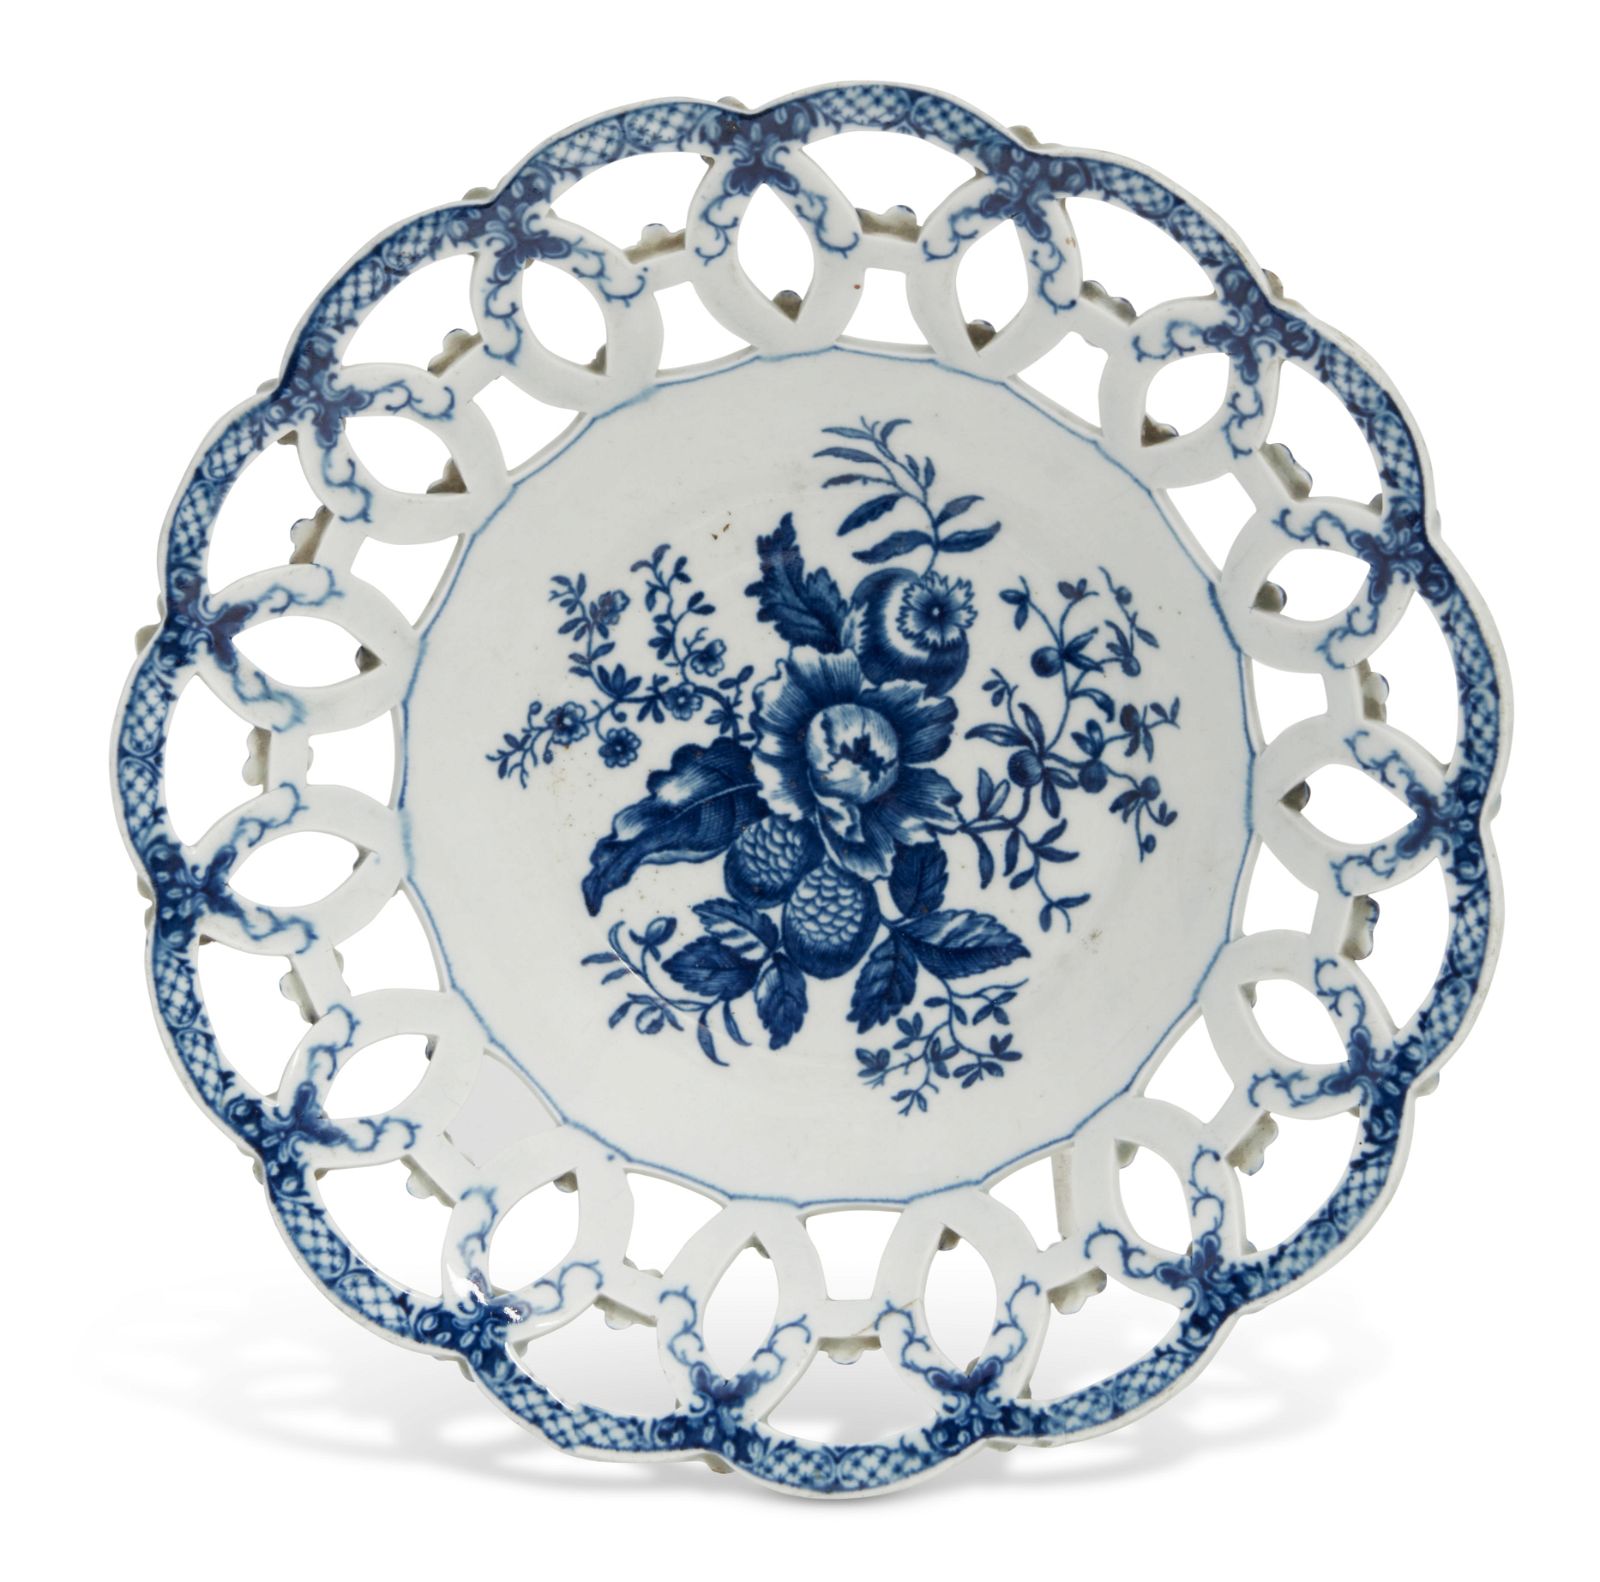 A WORCESTER BLUE AND WHITE PORCELAIN